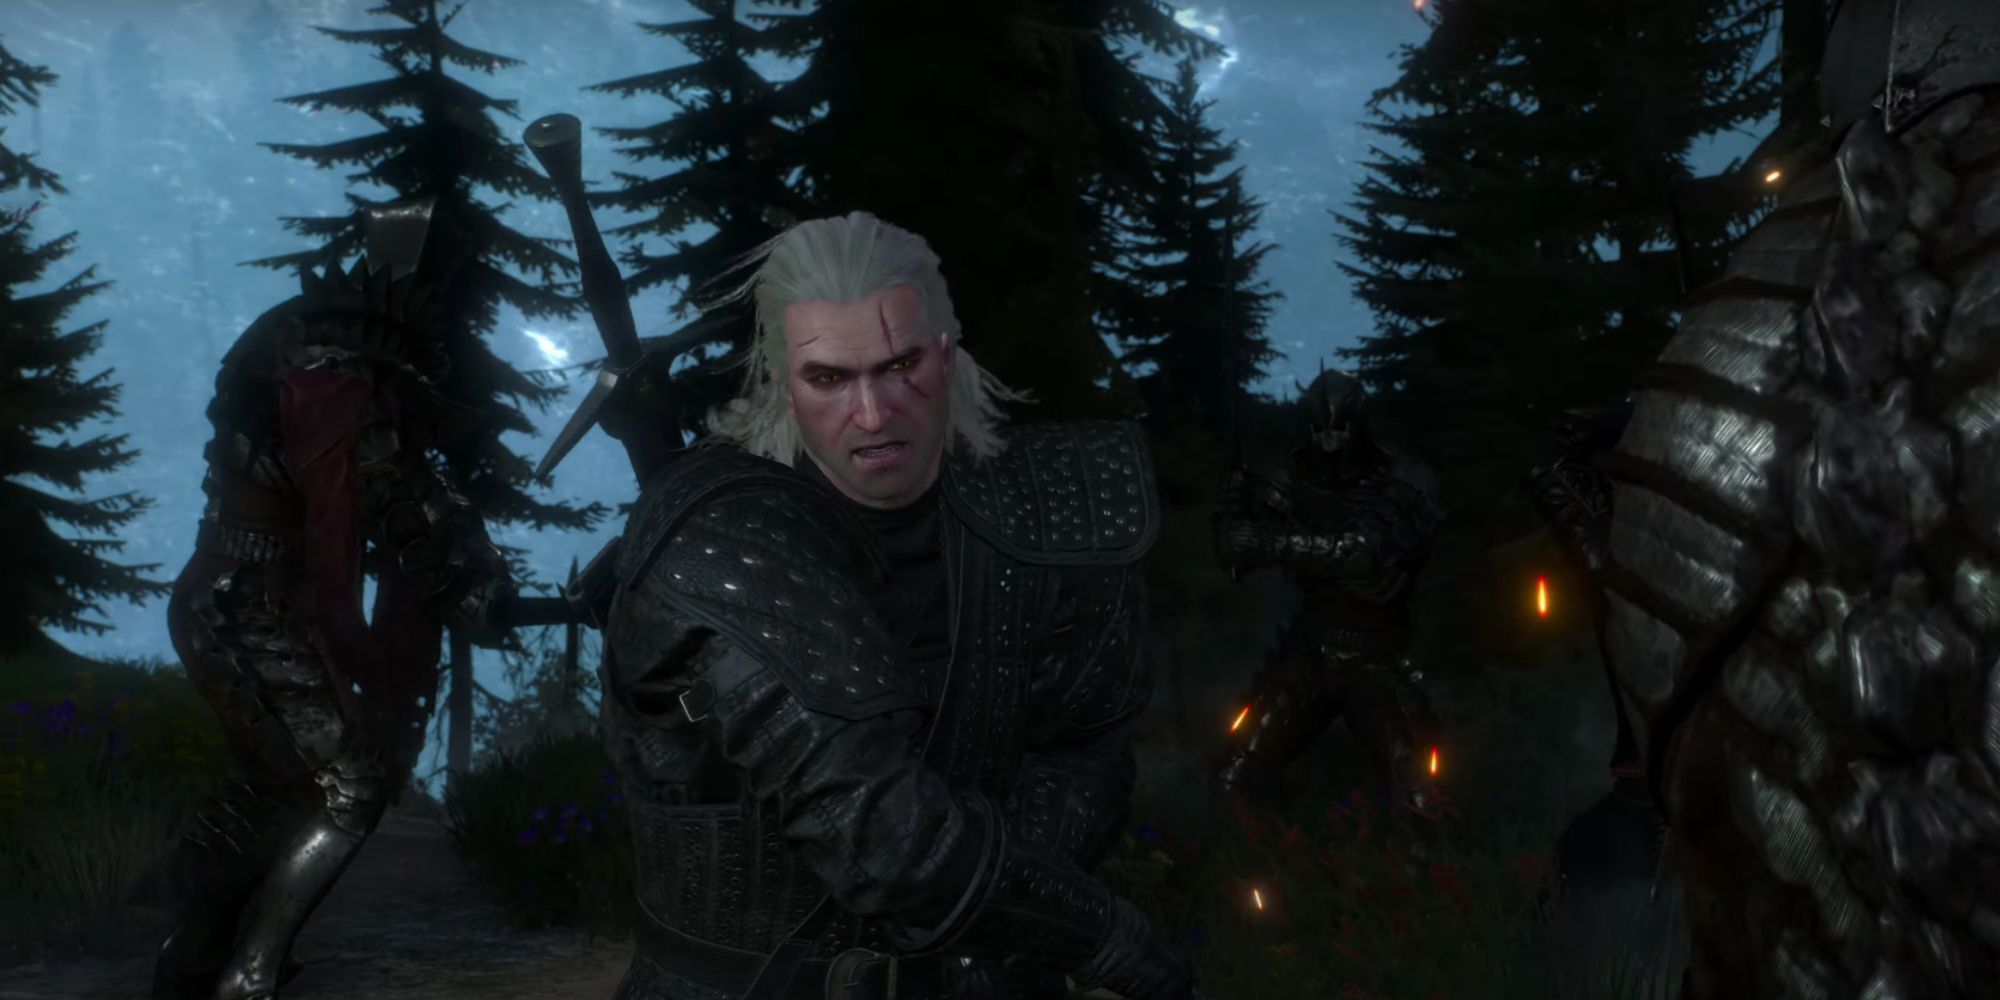 The Witcher 3 Next-Gen Trailer Shows Off Netflix Series-Based Content